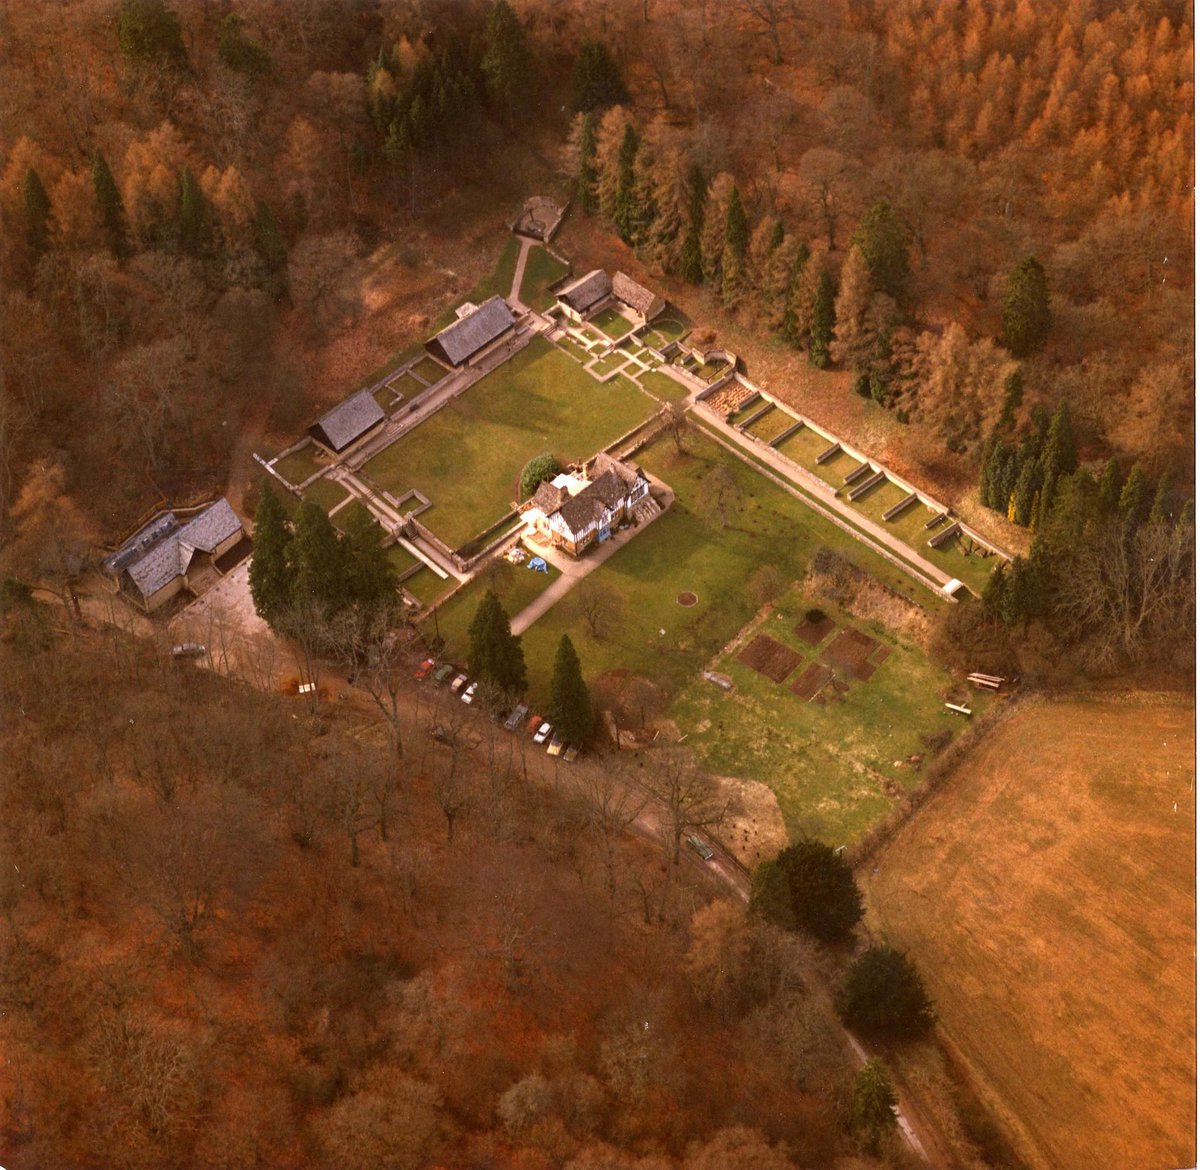 Aerial shot of the Villa from fifty years ago. What has changed? What has stayed the same?